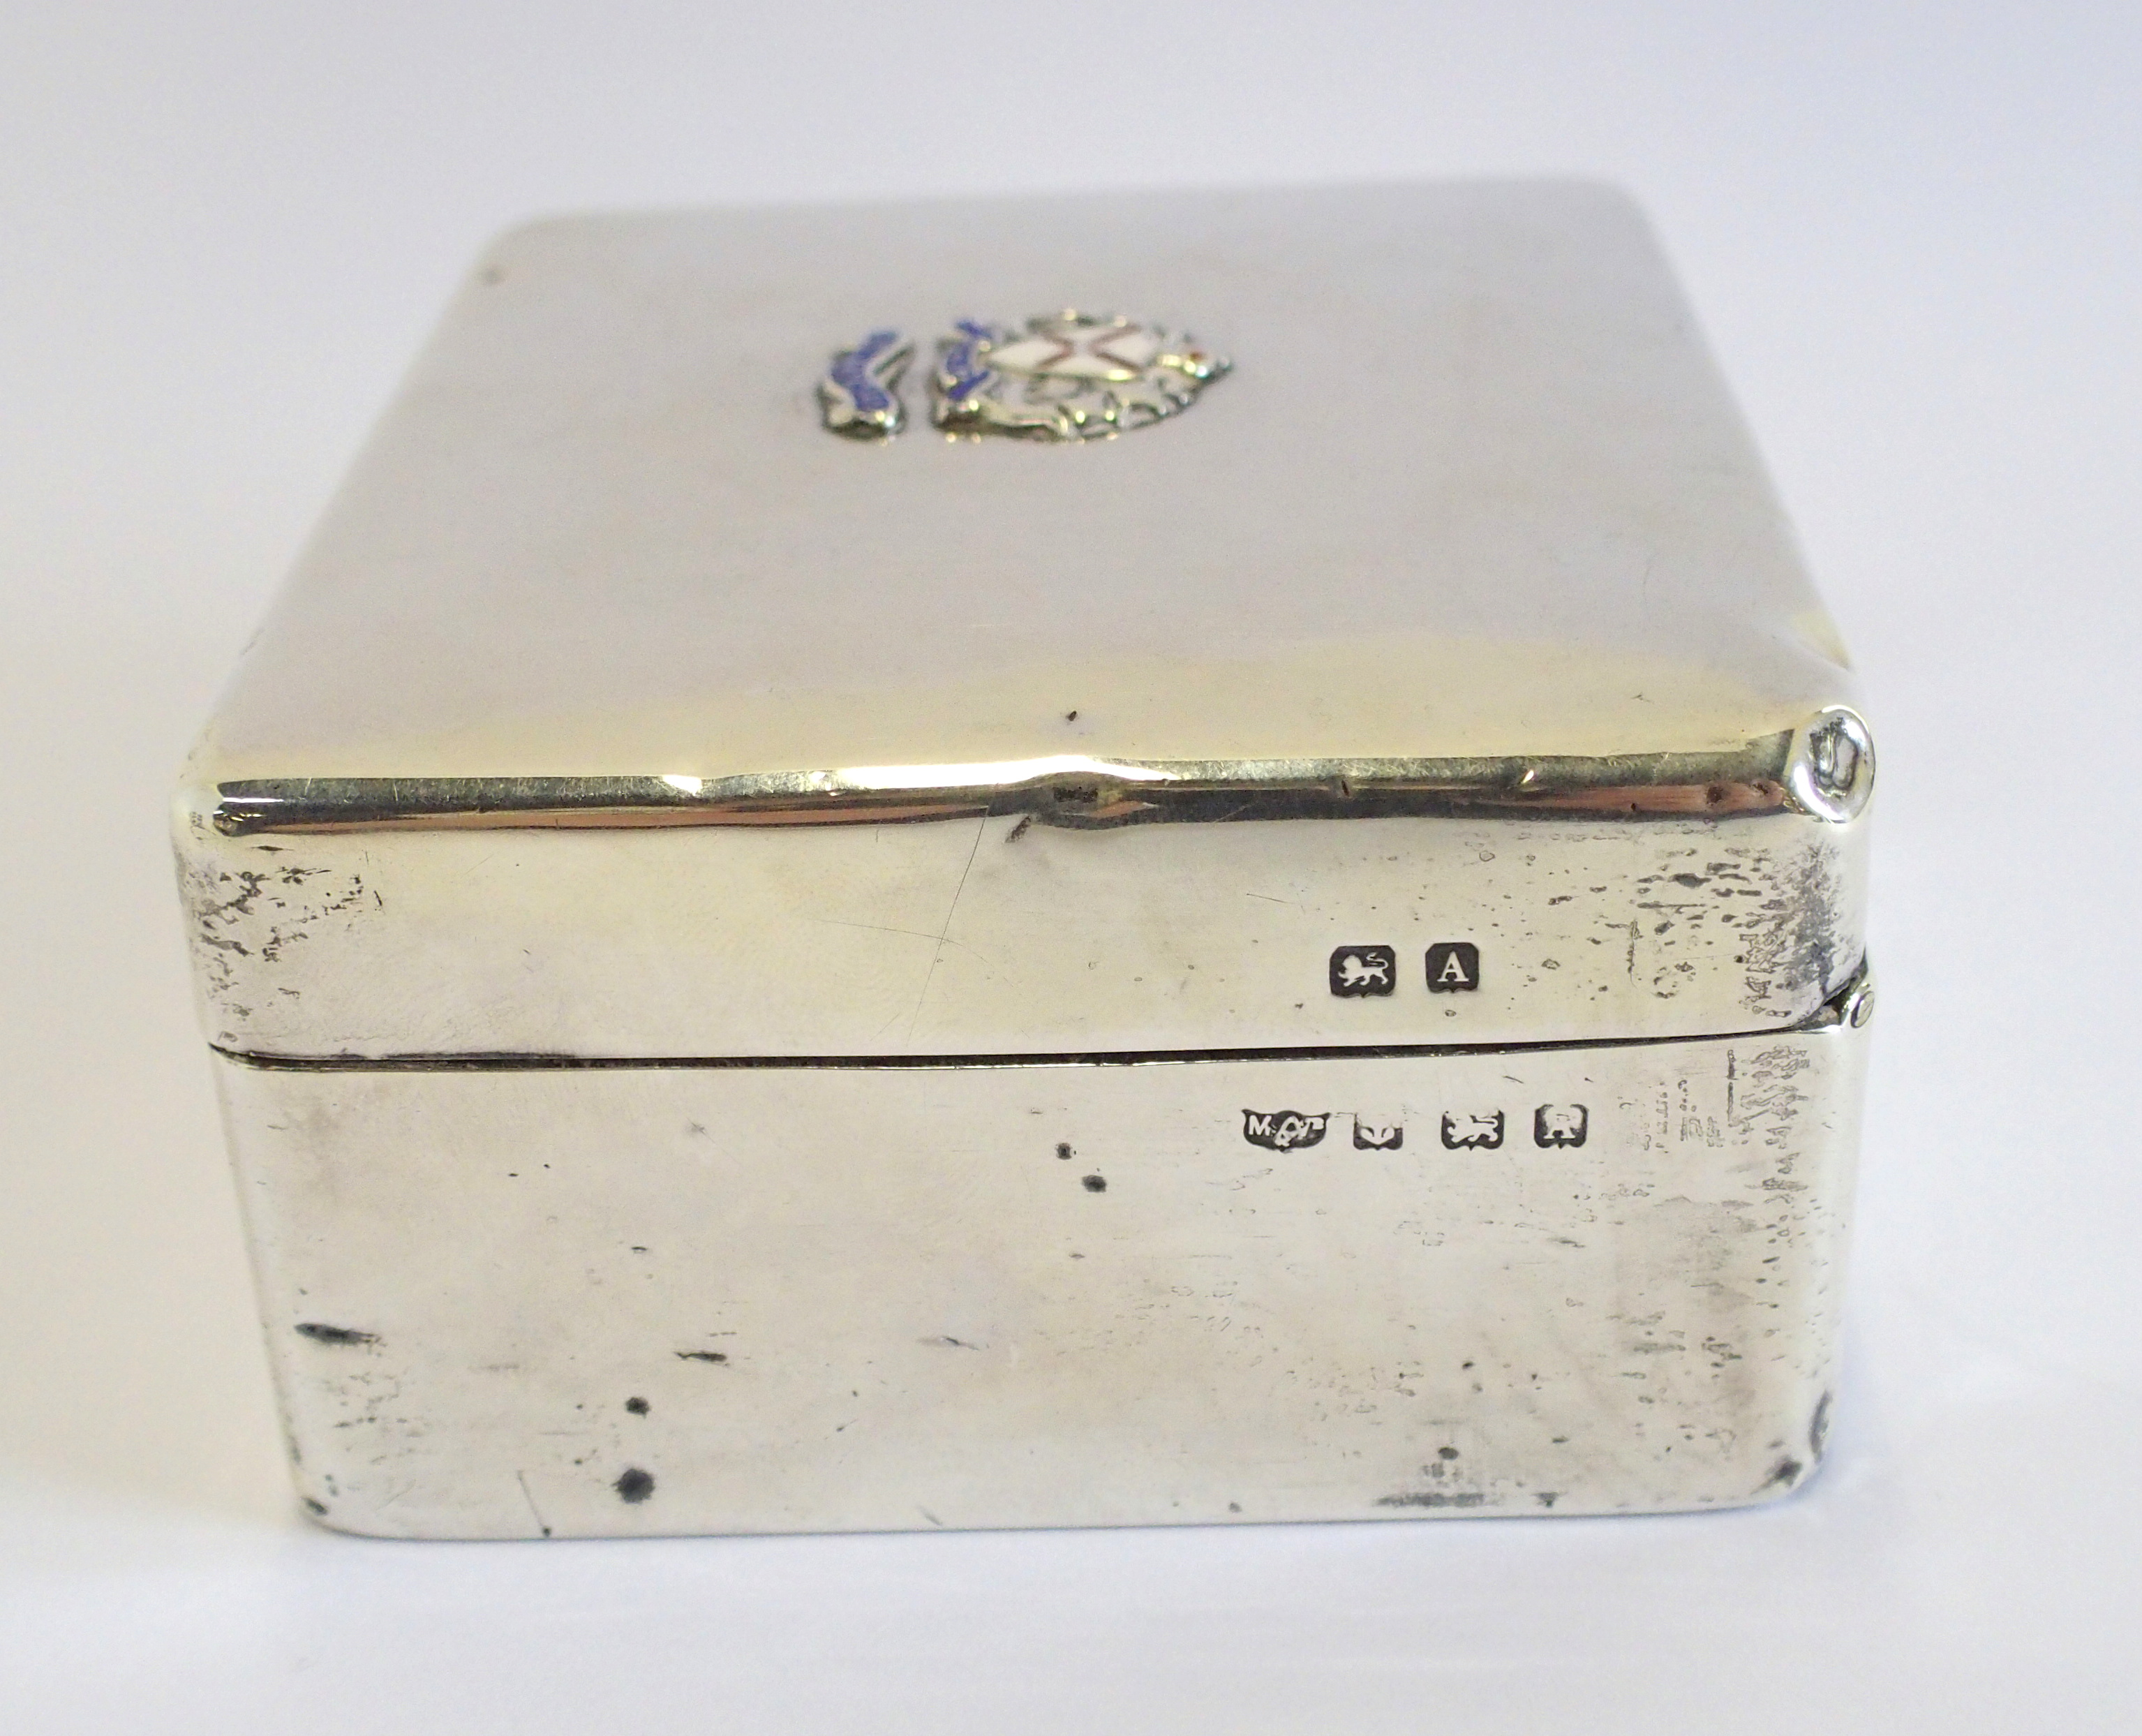 To be sold for BBC Children in Need
An Art Deco 'SS Arcadian' silver cigarette box by Mappin & - Image 7 of 10